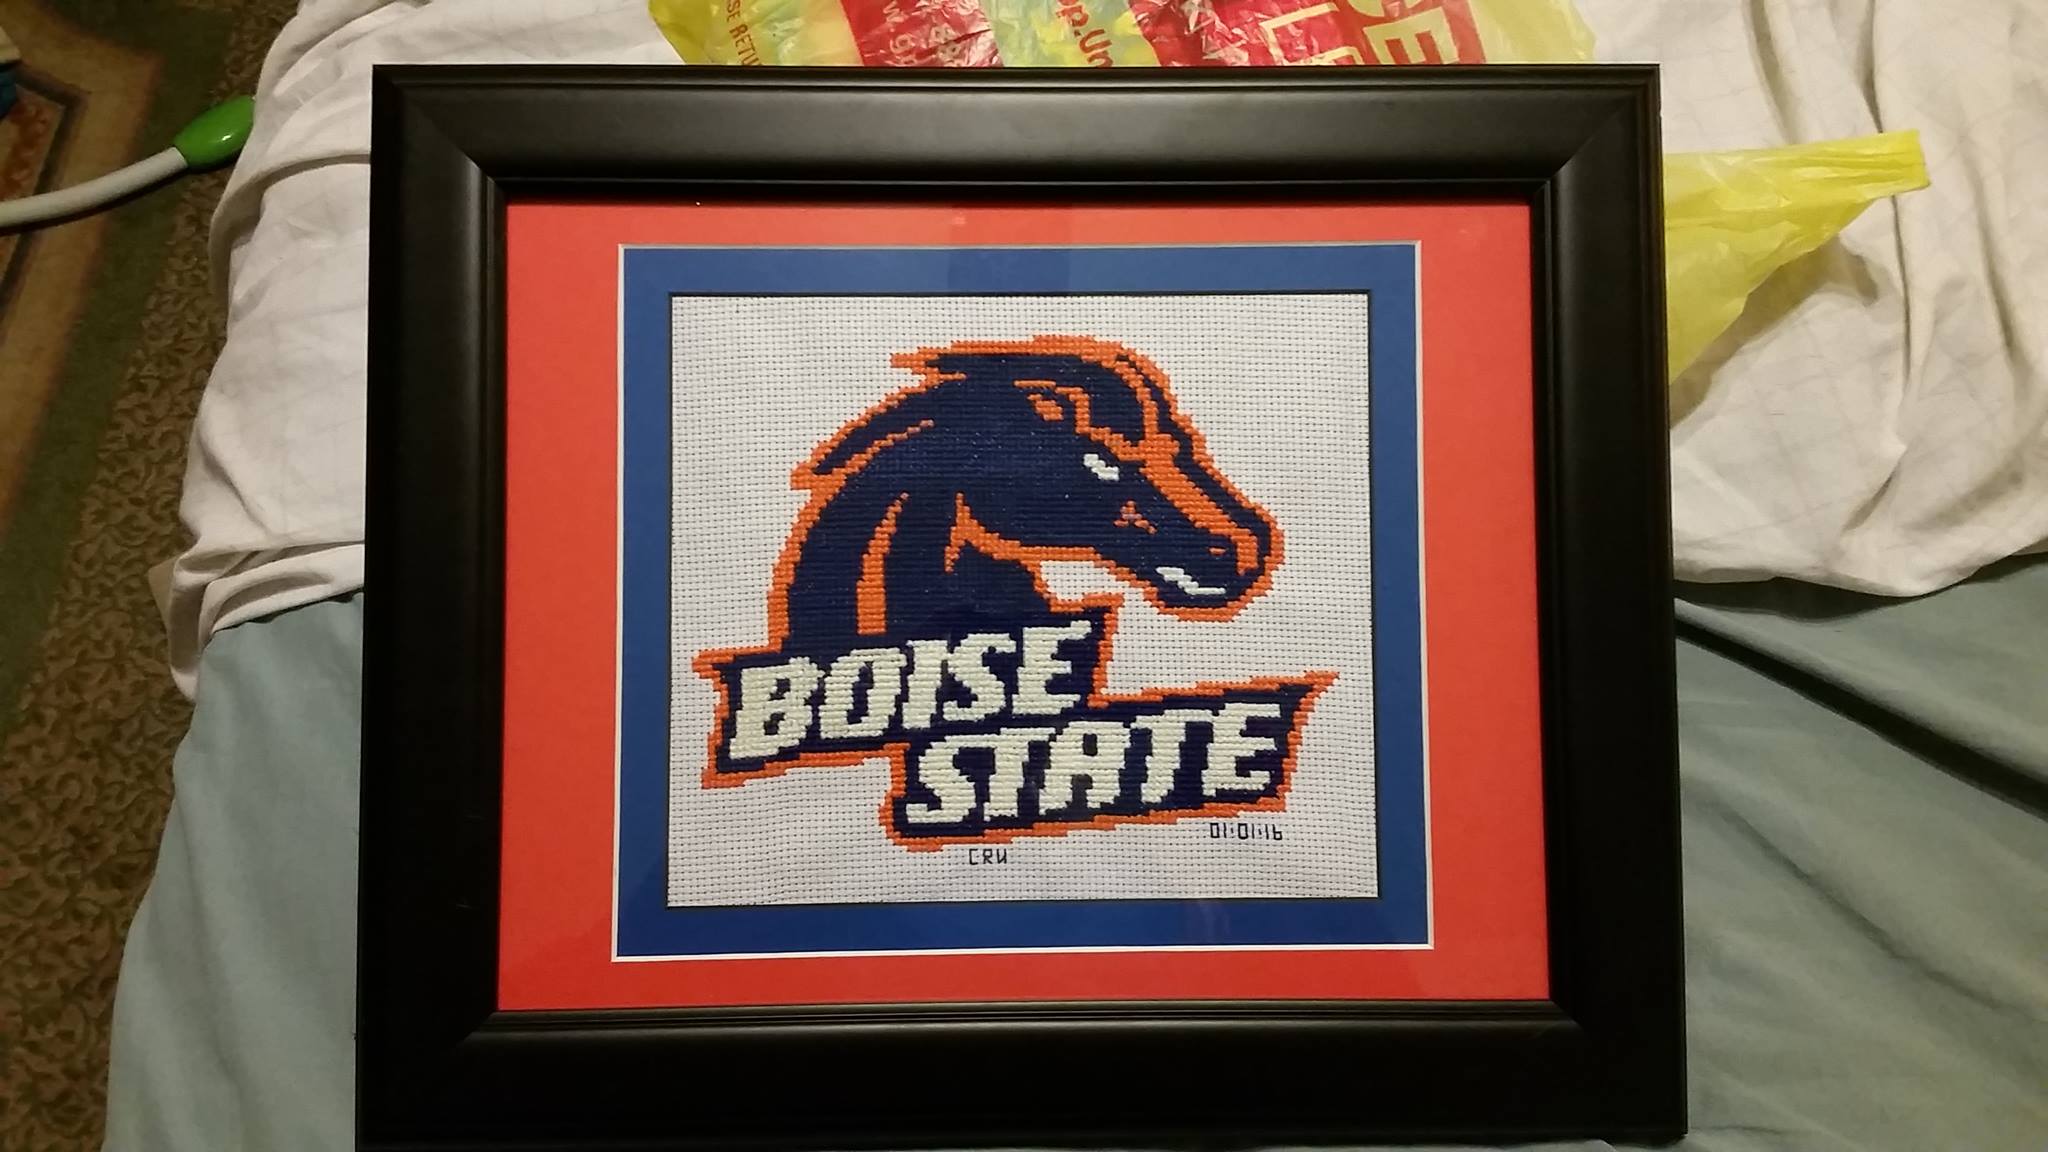 Boise State logo cross stitch finished work photo Author Facebook Fan Carrie Renae Uetz 2